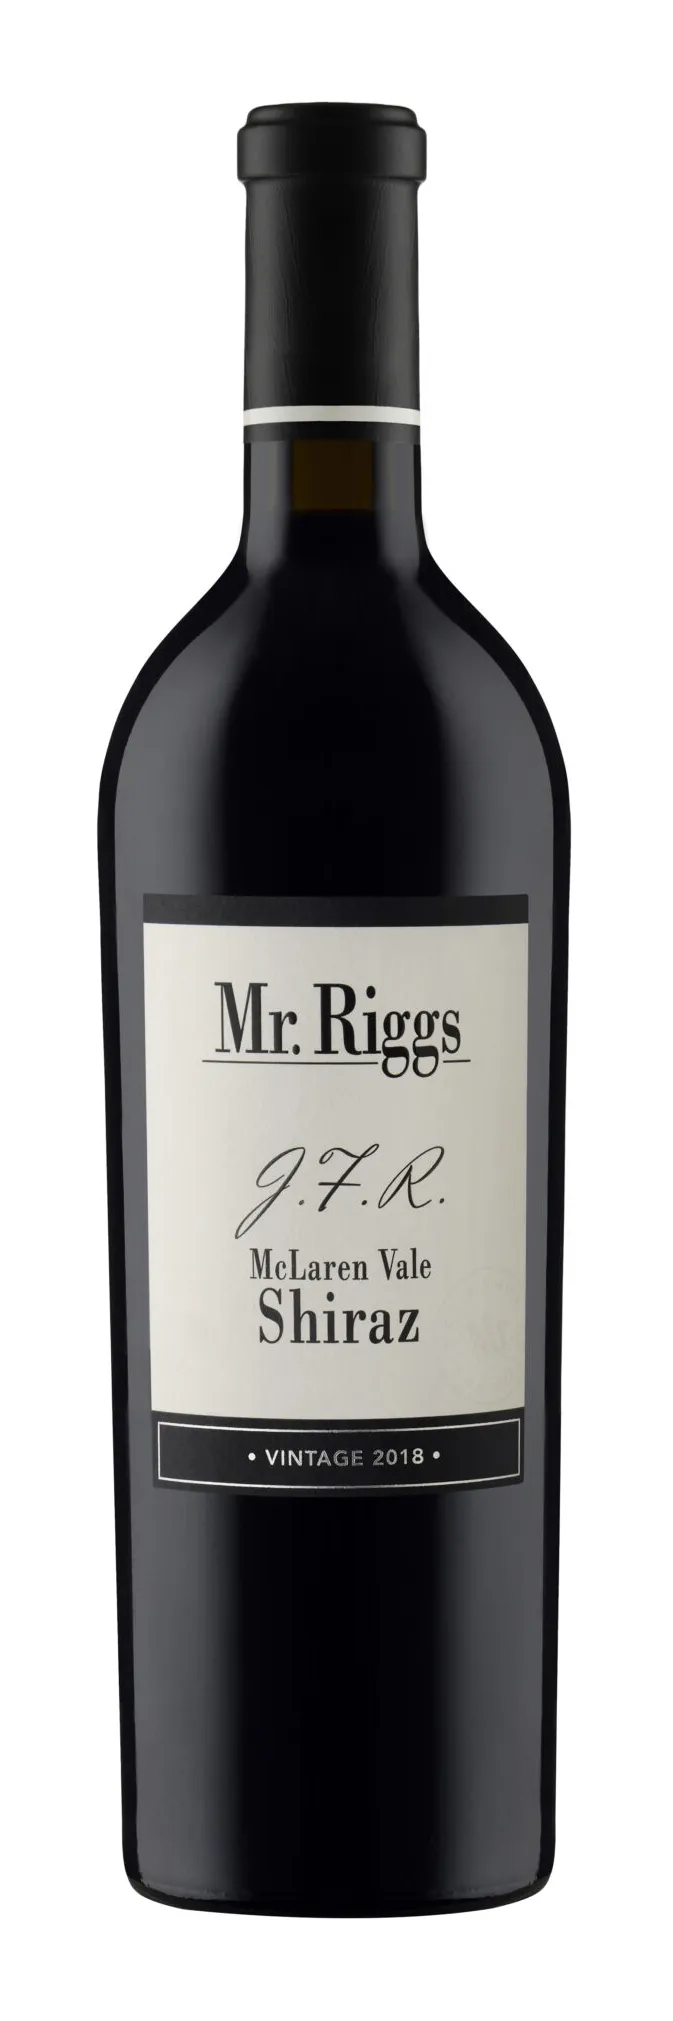 Bottle of Mr. Riggs J.F.R. Shiraz from search results